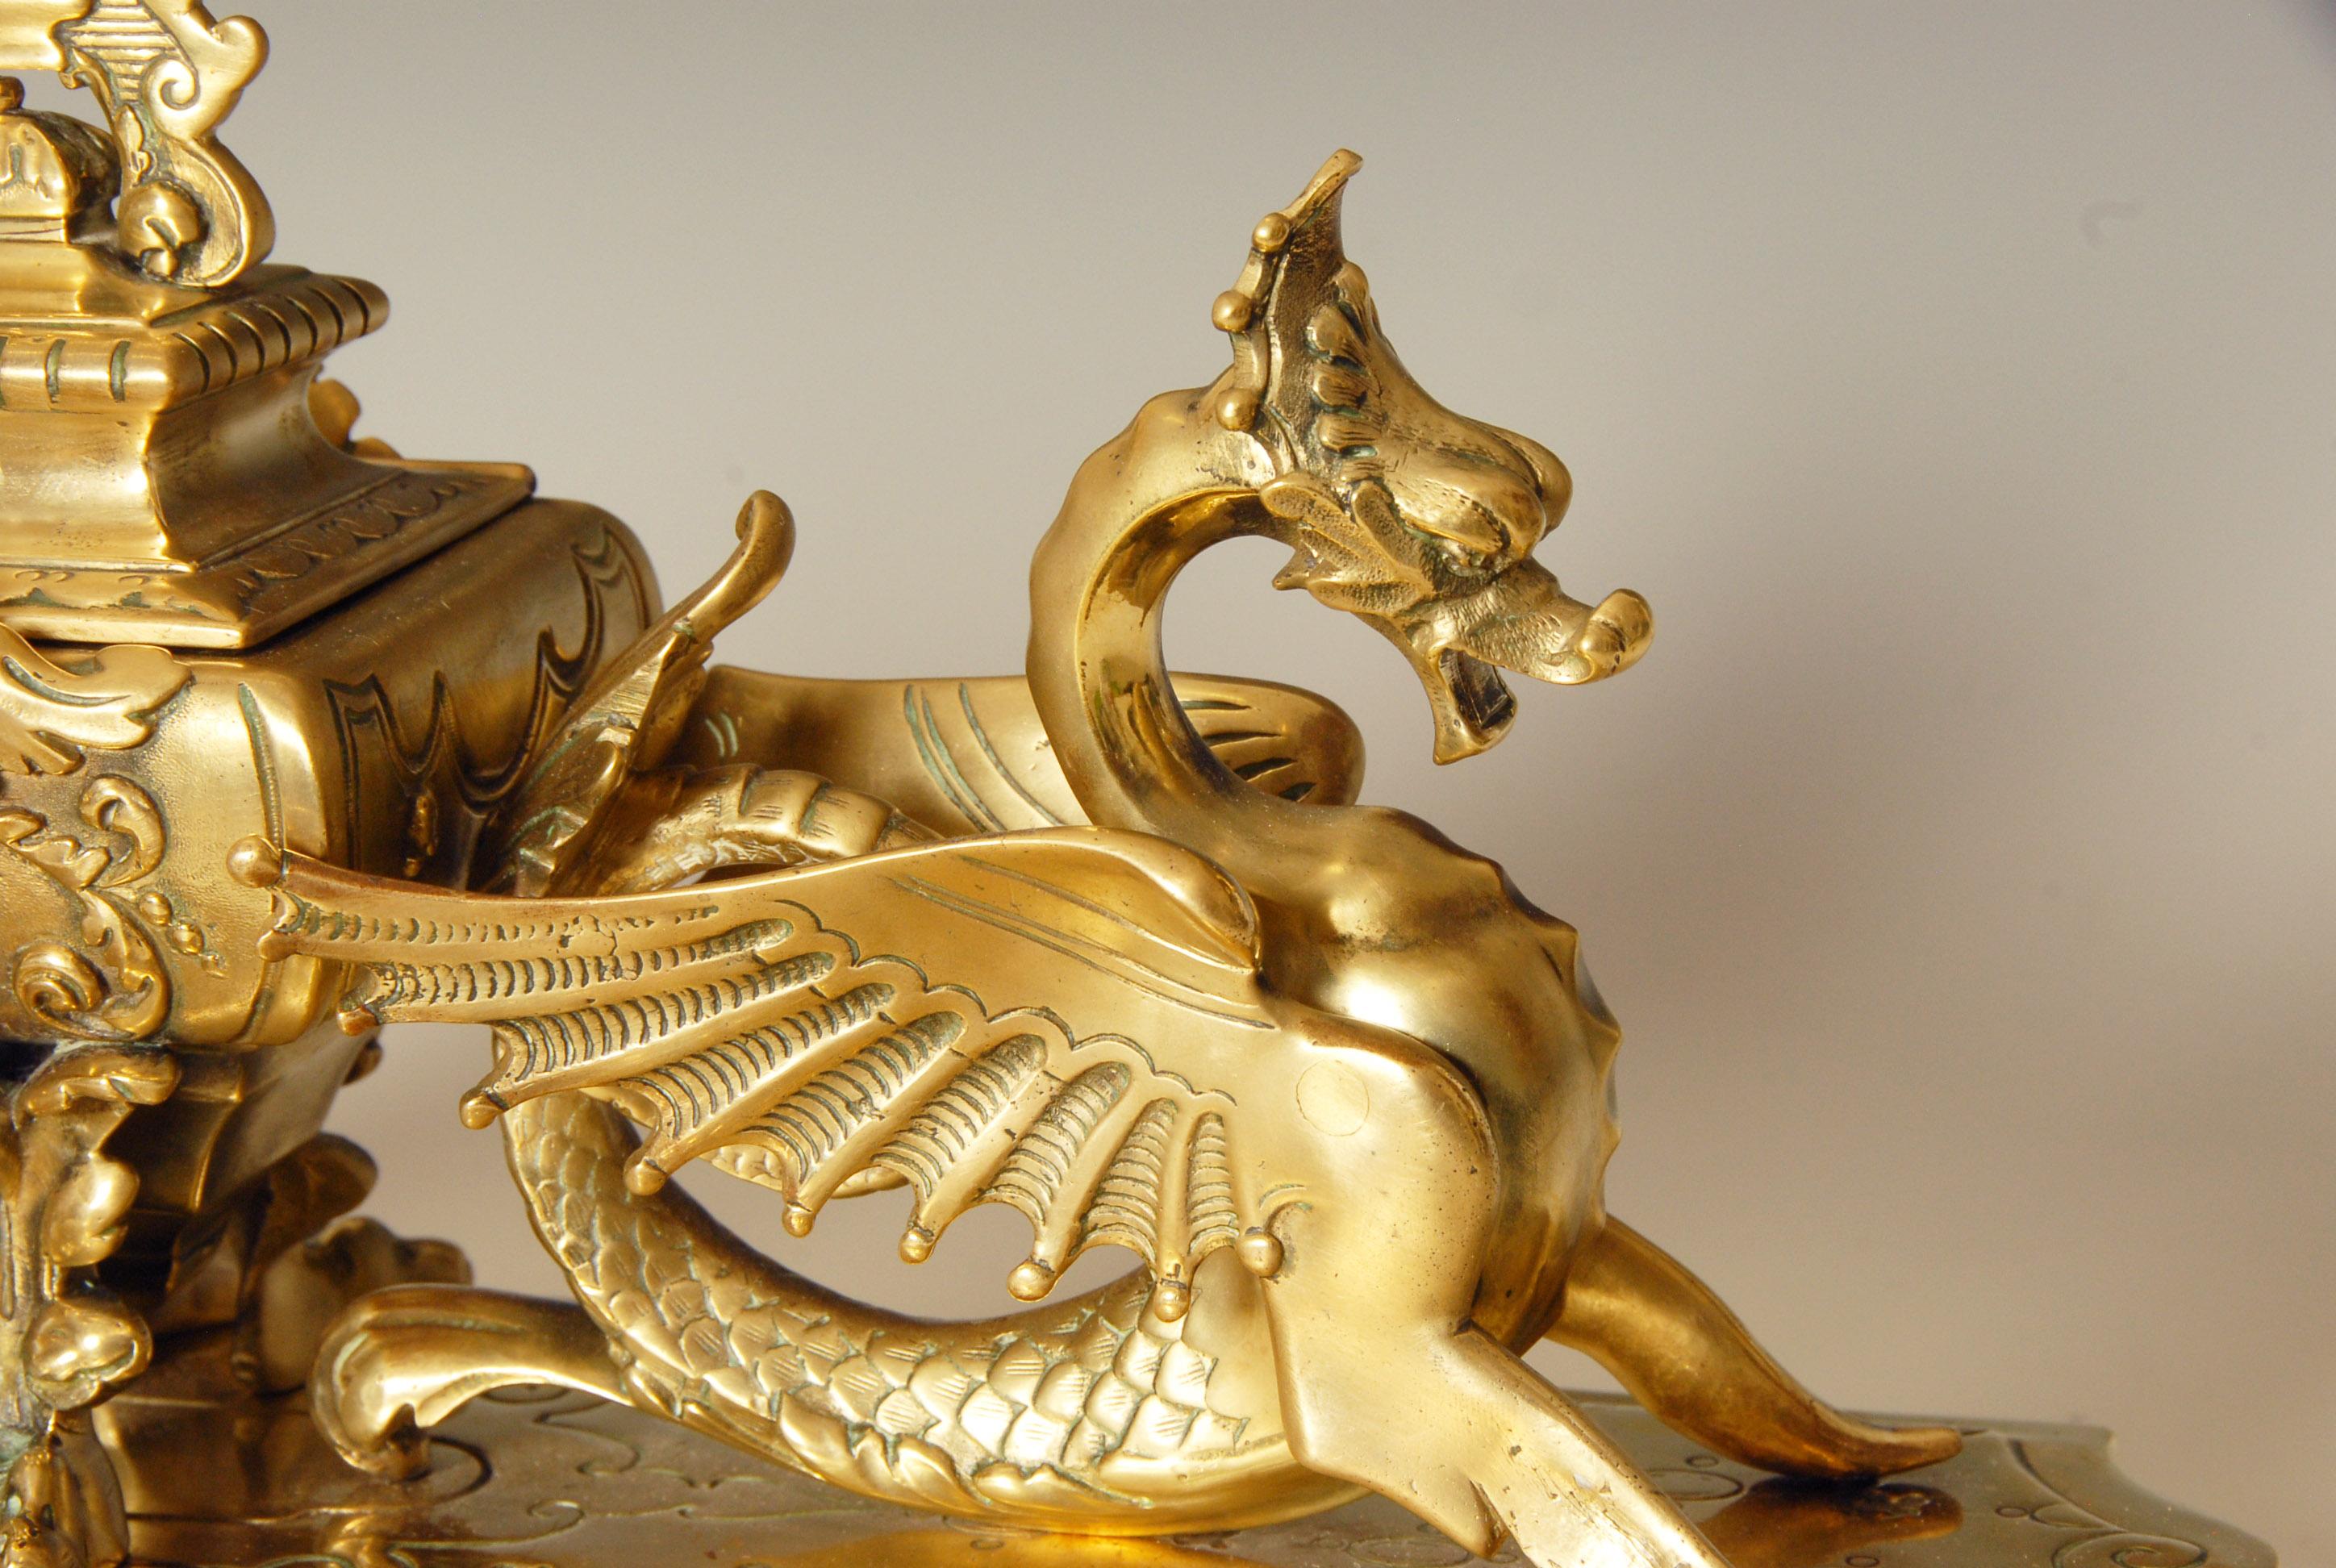 Late 19th century large bronze inkwell with dragons probably French.
A very impressive desk accessory.
The porcelain insert is not original.

Price includes shipping to anywhere in the world.